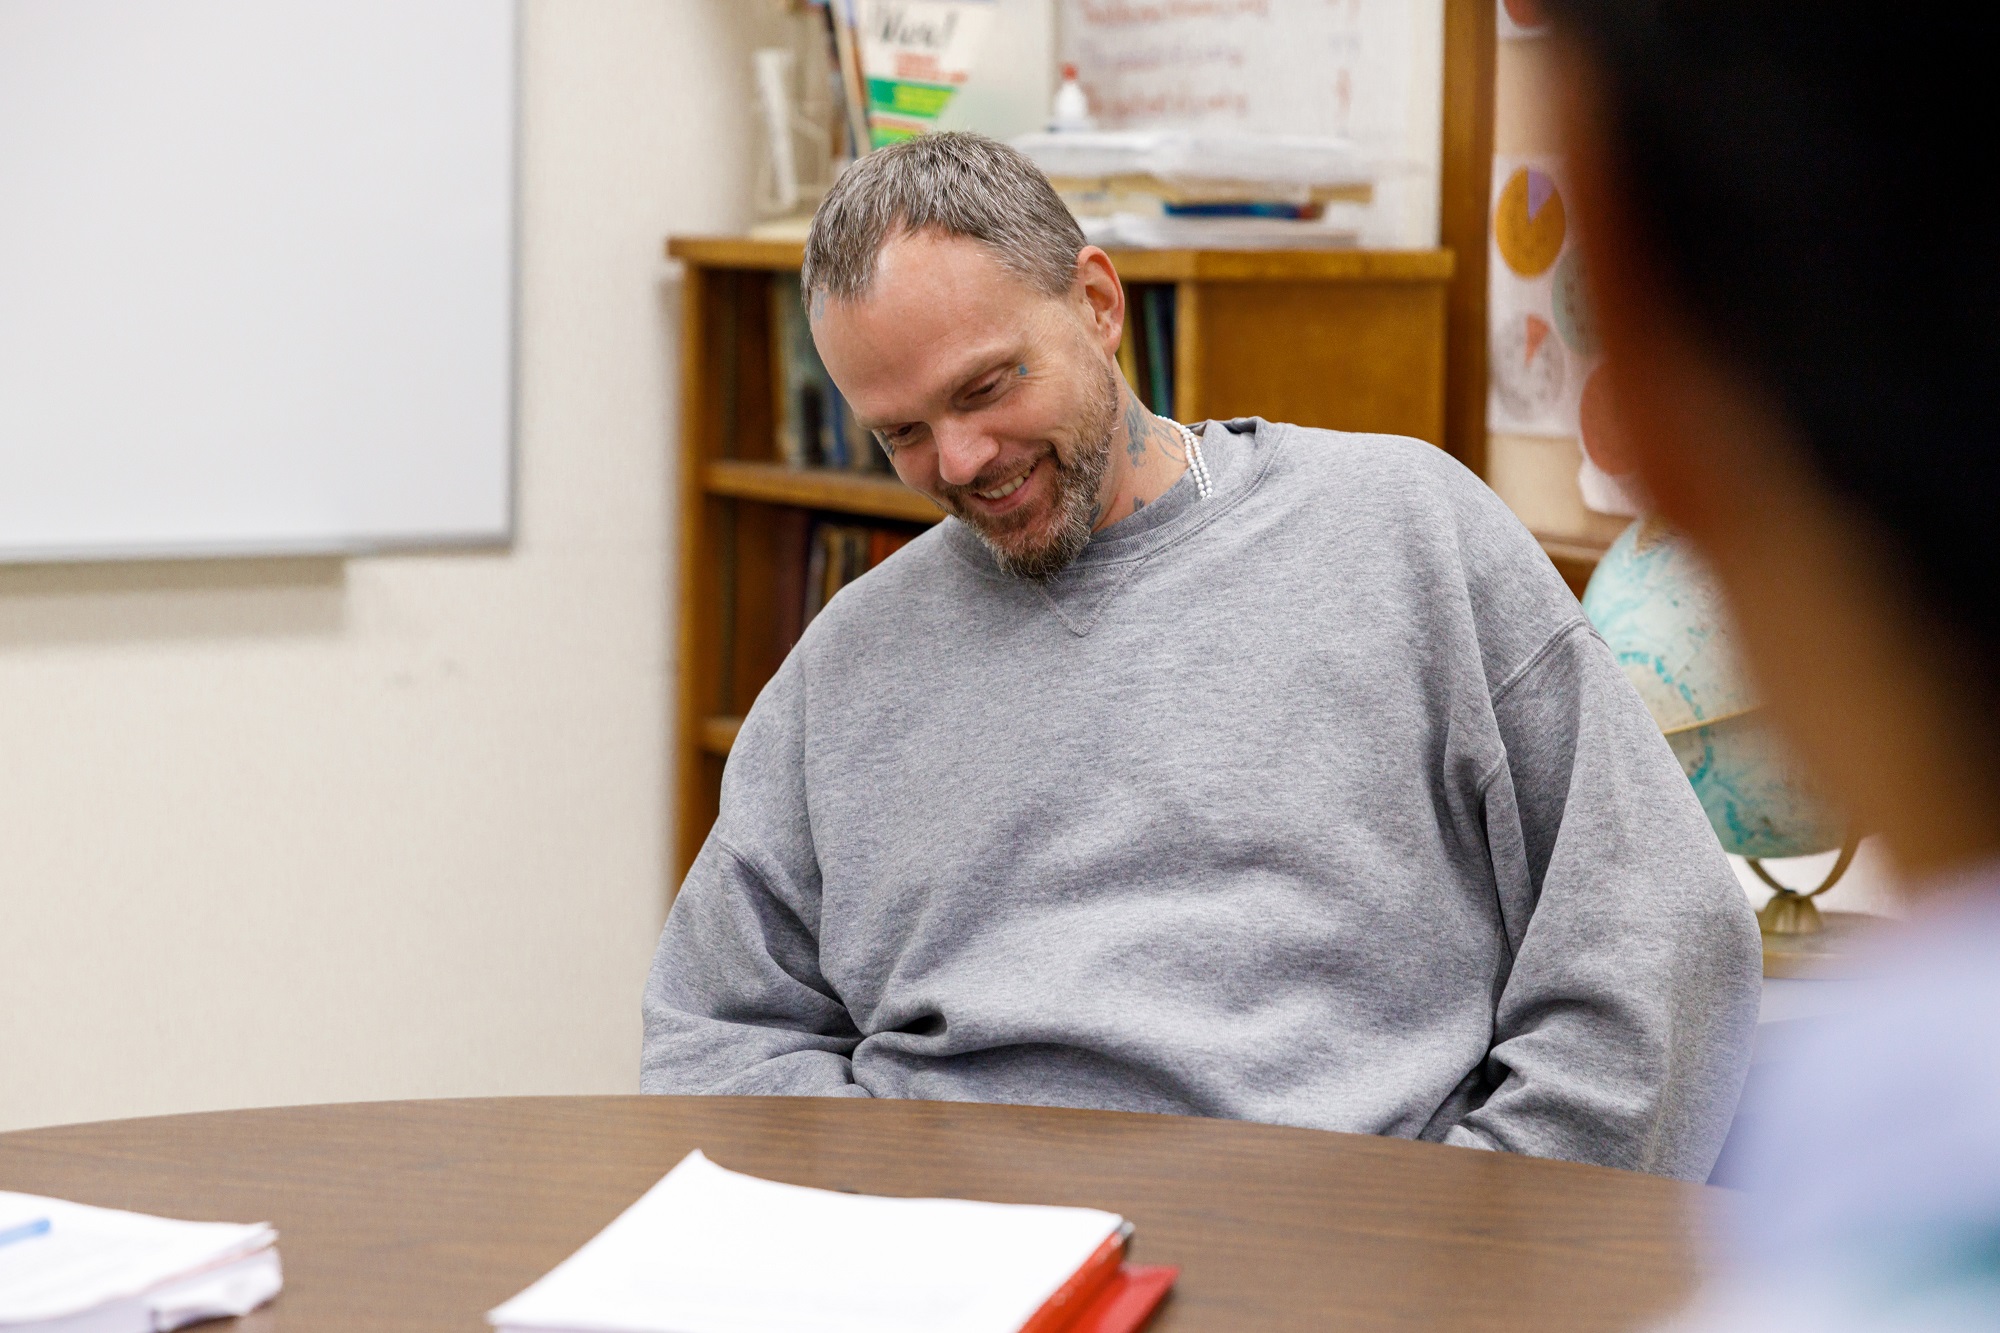 Daniel Schleicher participates in UW's Odyssey Beyond Bars program, which "offers college jumpstart programs to students incarcerated in Wisconsin state prisons." (Photo by Chris Bacarella)